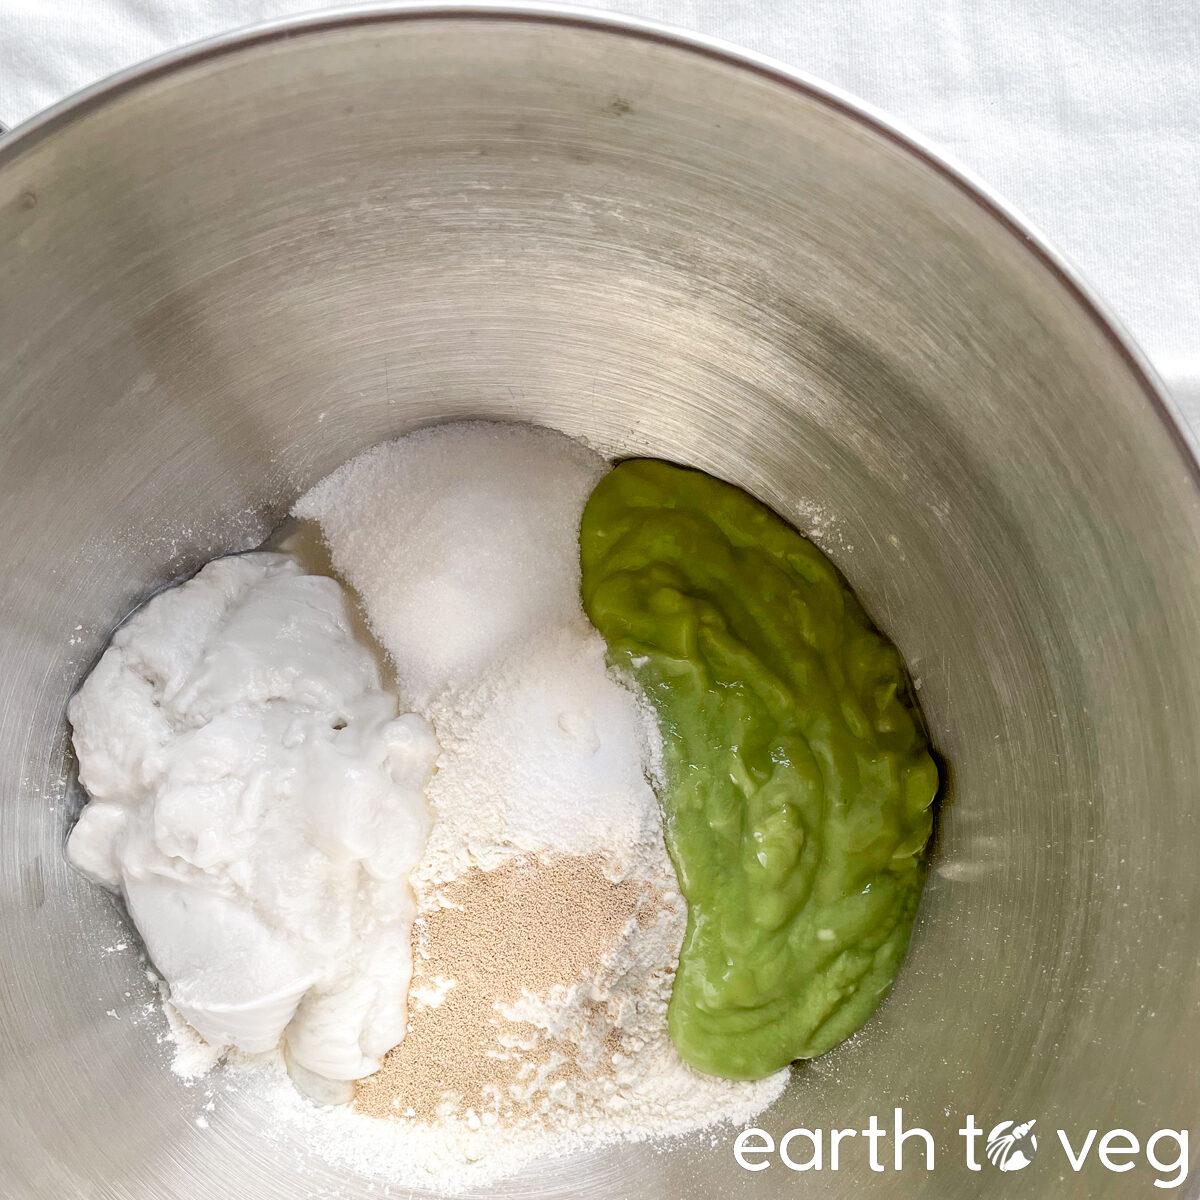 The ingredients for pandan bread sit in a stainless steel mixing bowl.